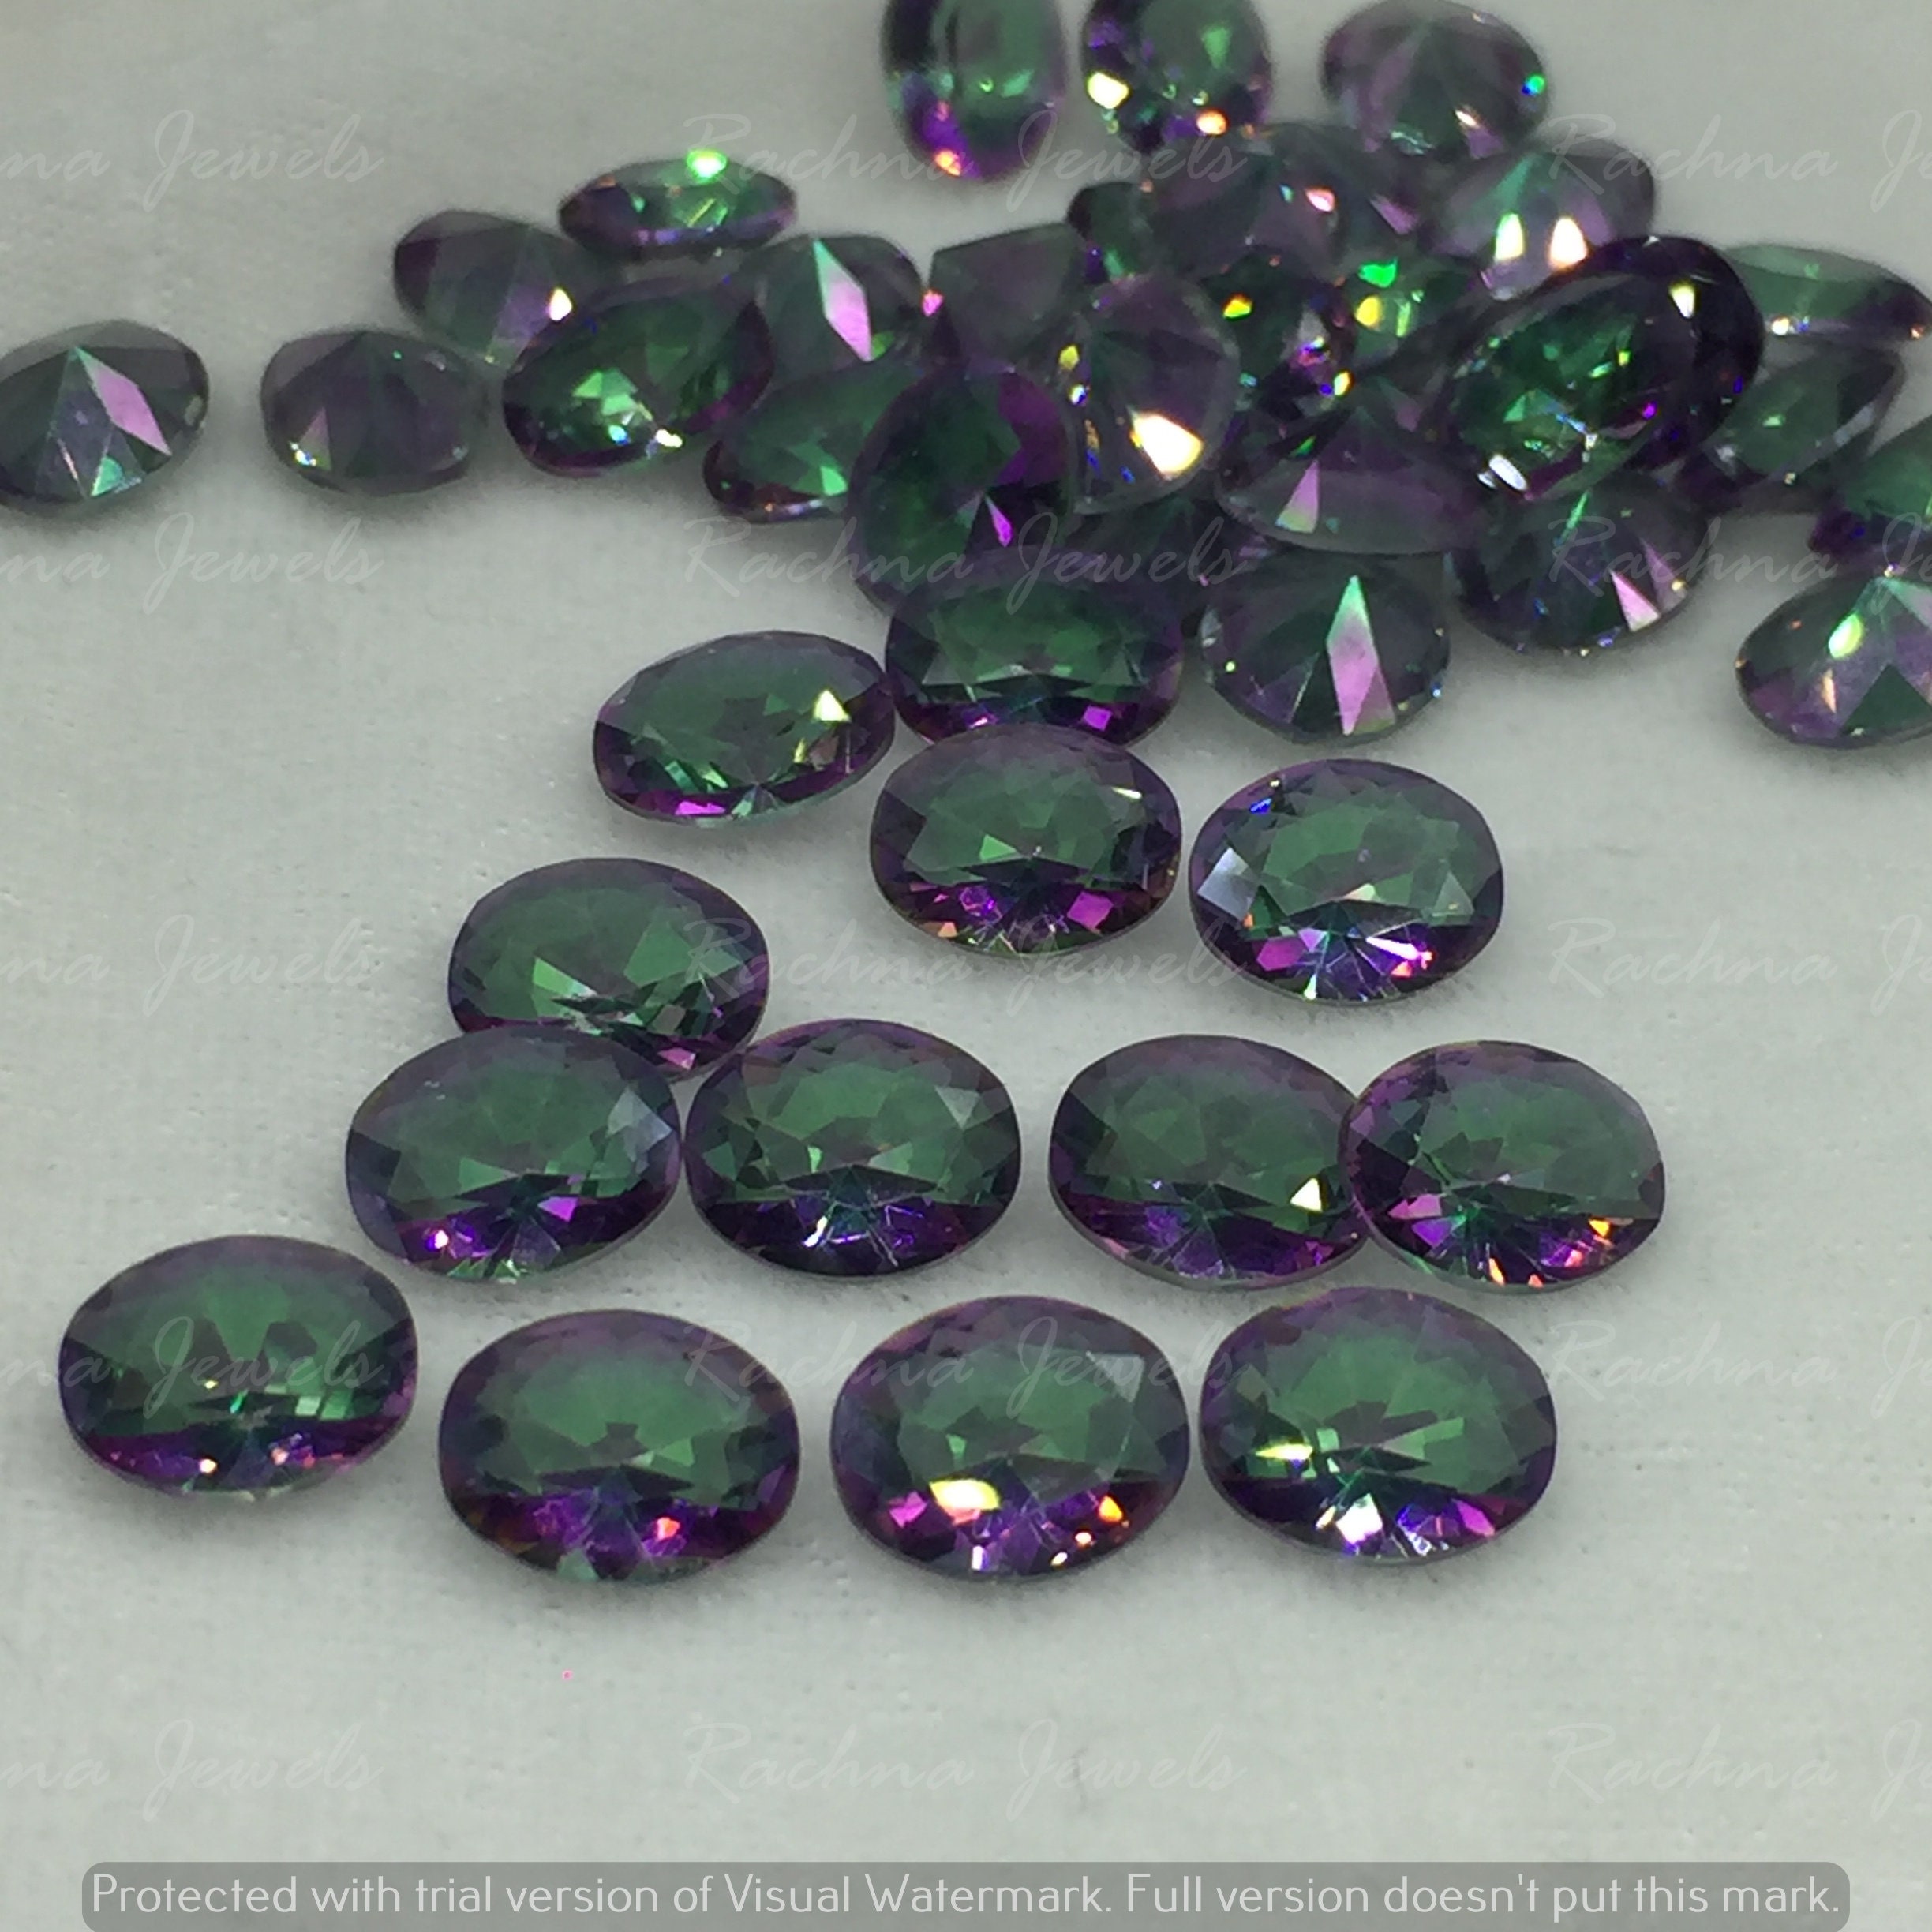 Wholesale Lot 7x5mm Emerald Cut Natural African Amethyst Loose Calibrated Gems 